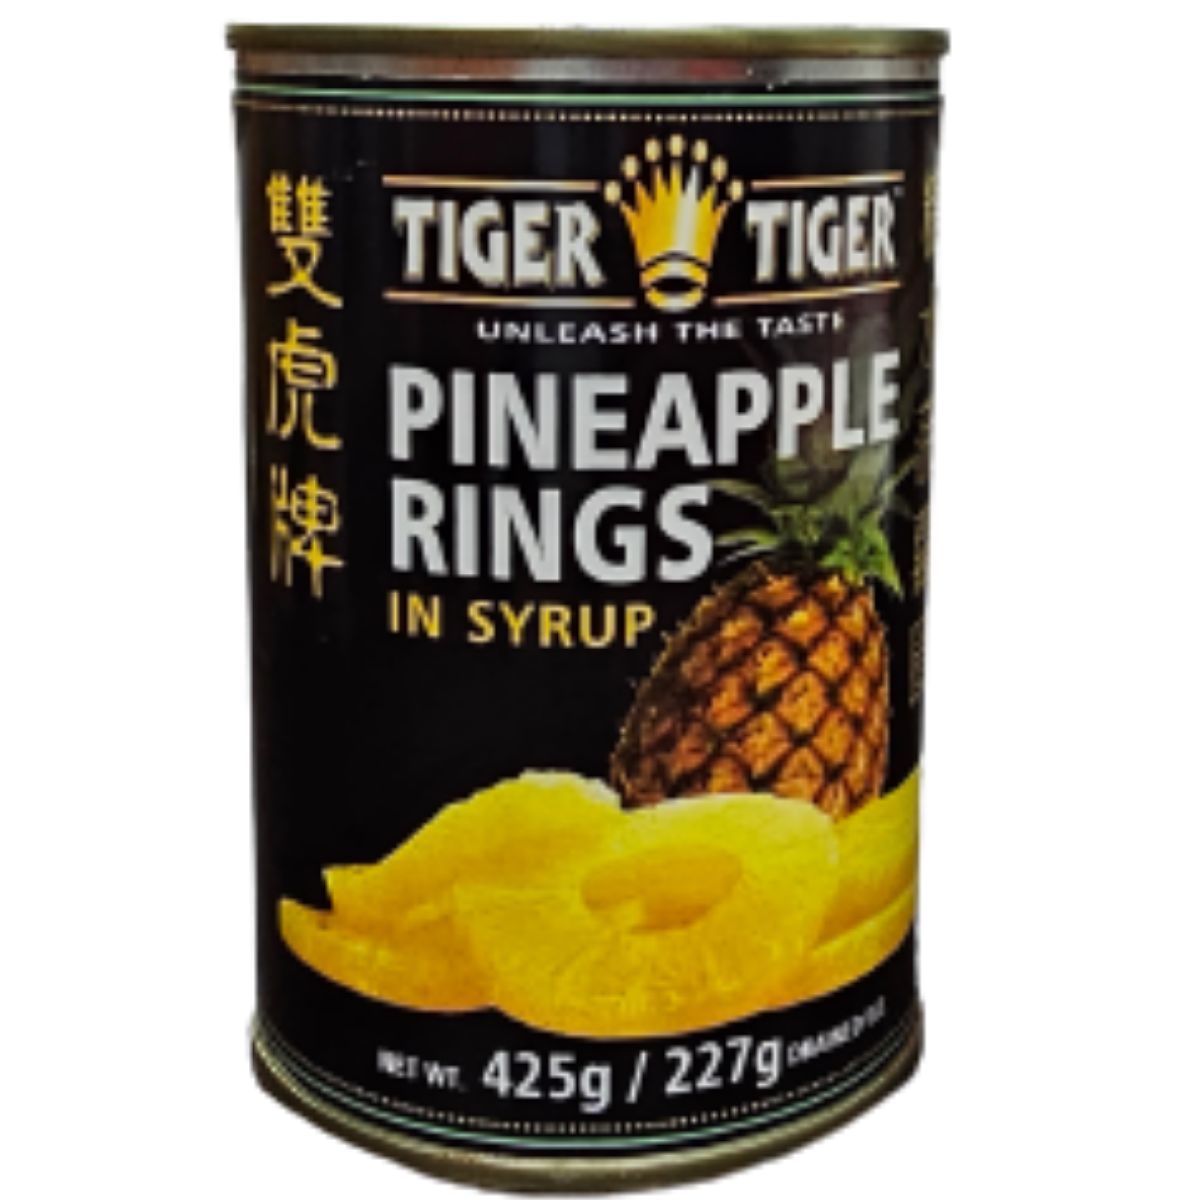 TIGER GLUTENSIZ PINEAPPLE RINGS IN SYRUP 425 G